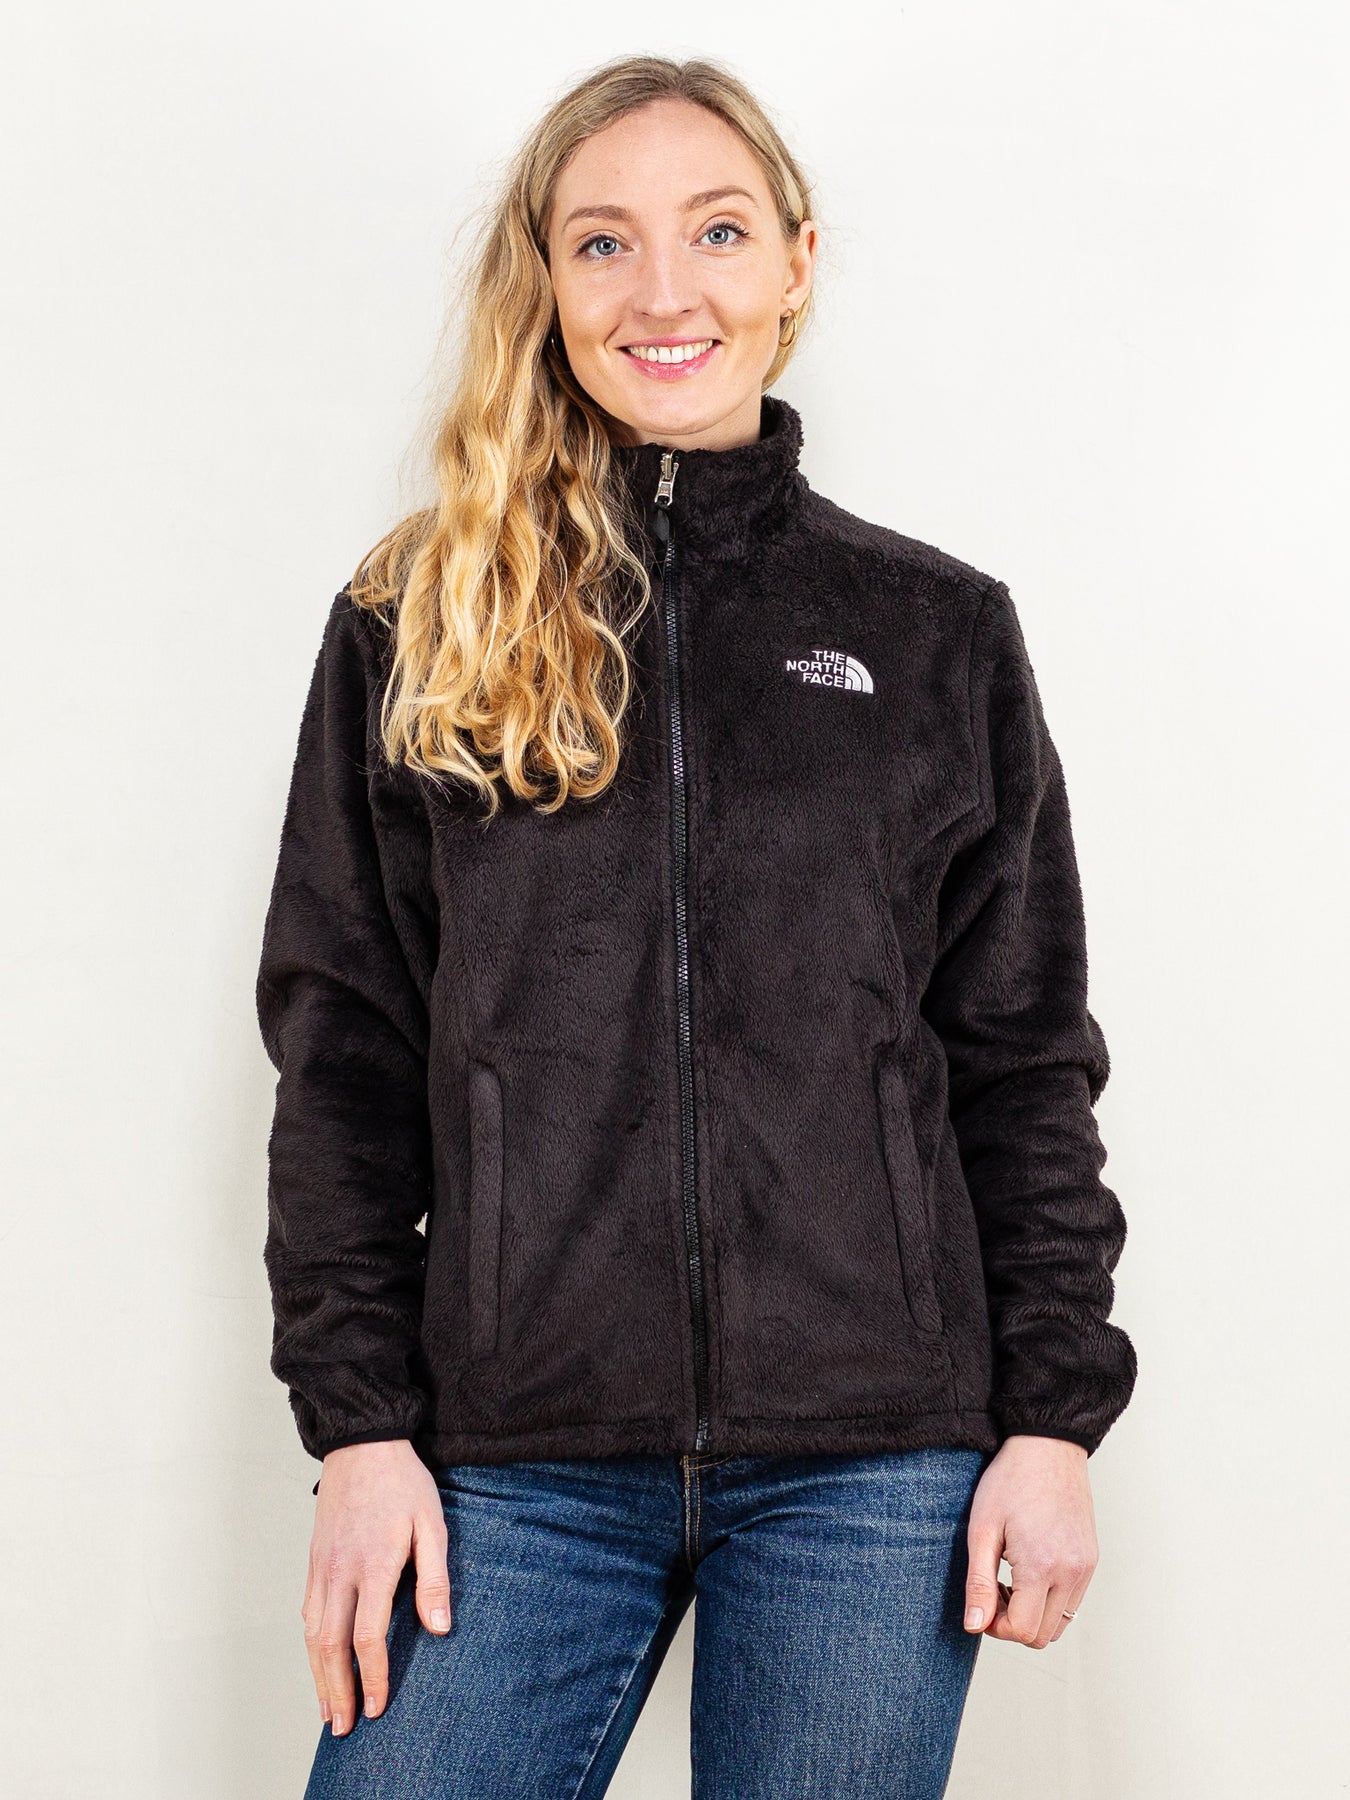 The North Face Osito Jacket  North face jacket womens, North face outfits, North  face jacket